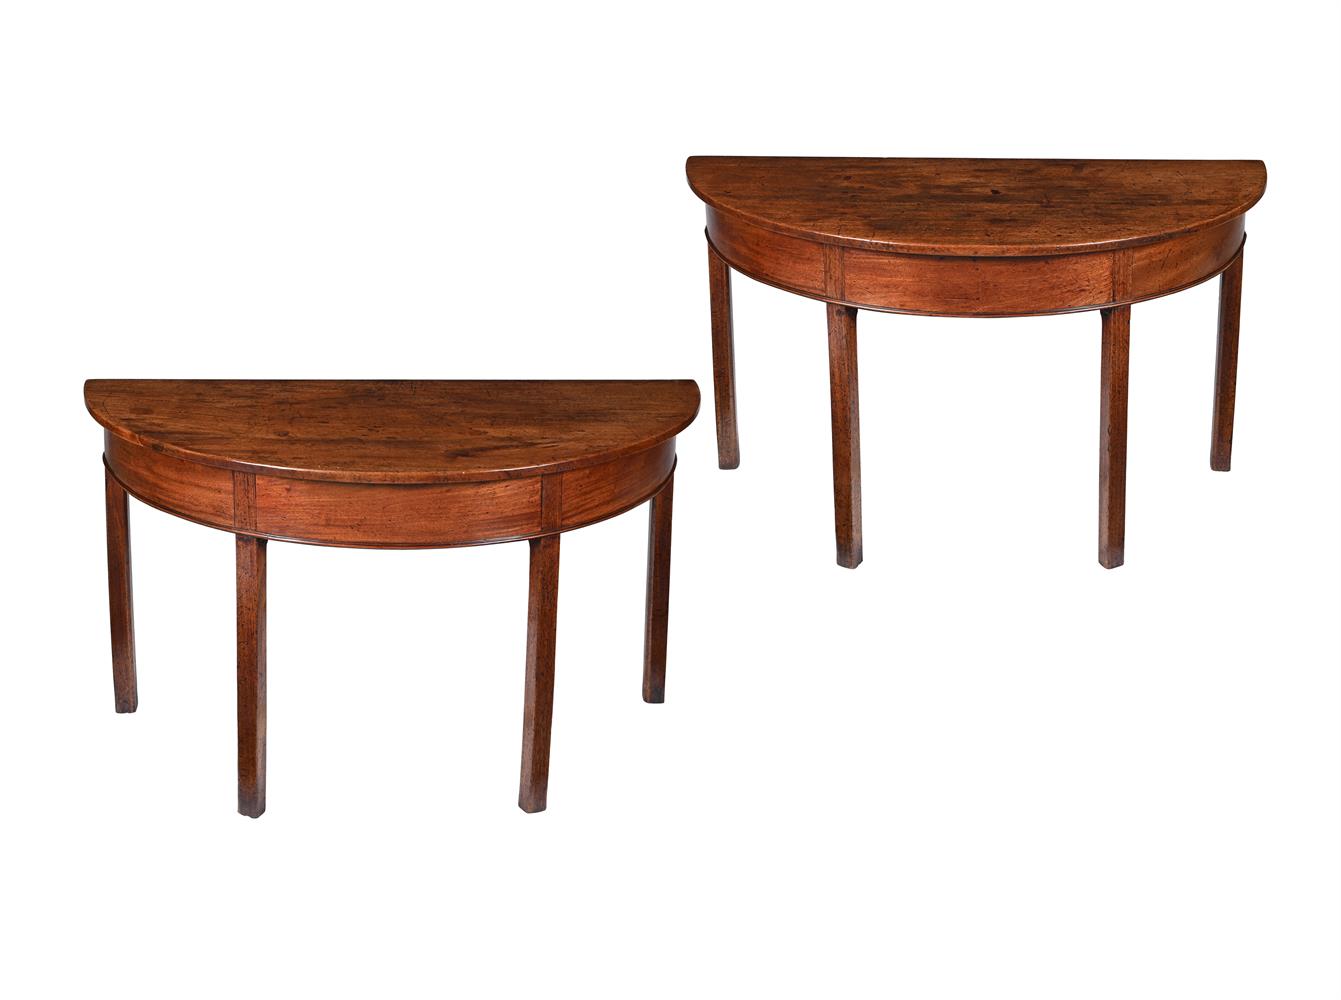 A PAIR OF GEORGE III MAHOGANY CONSOLE TABLES